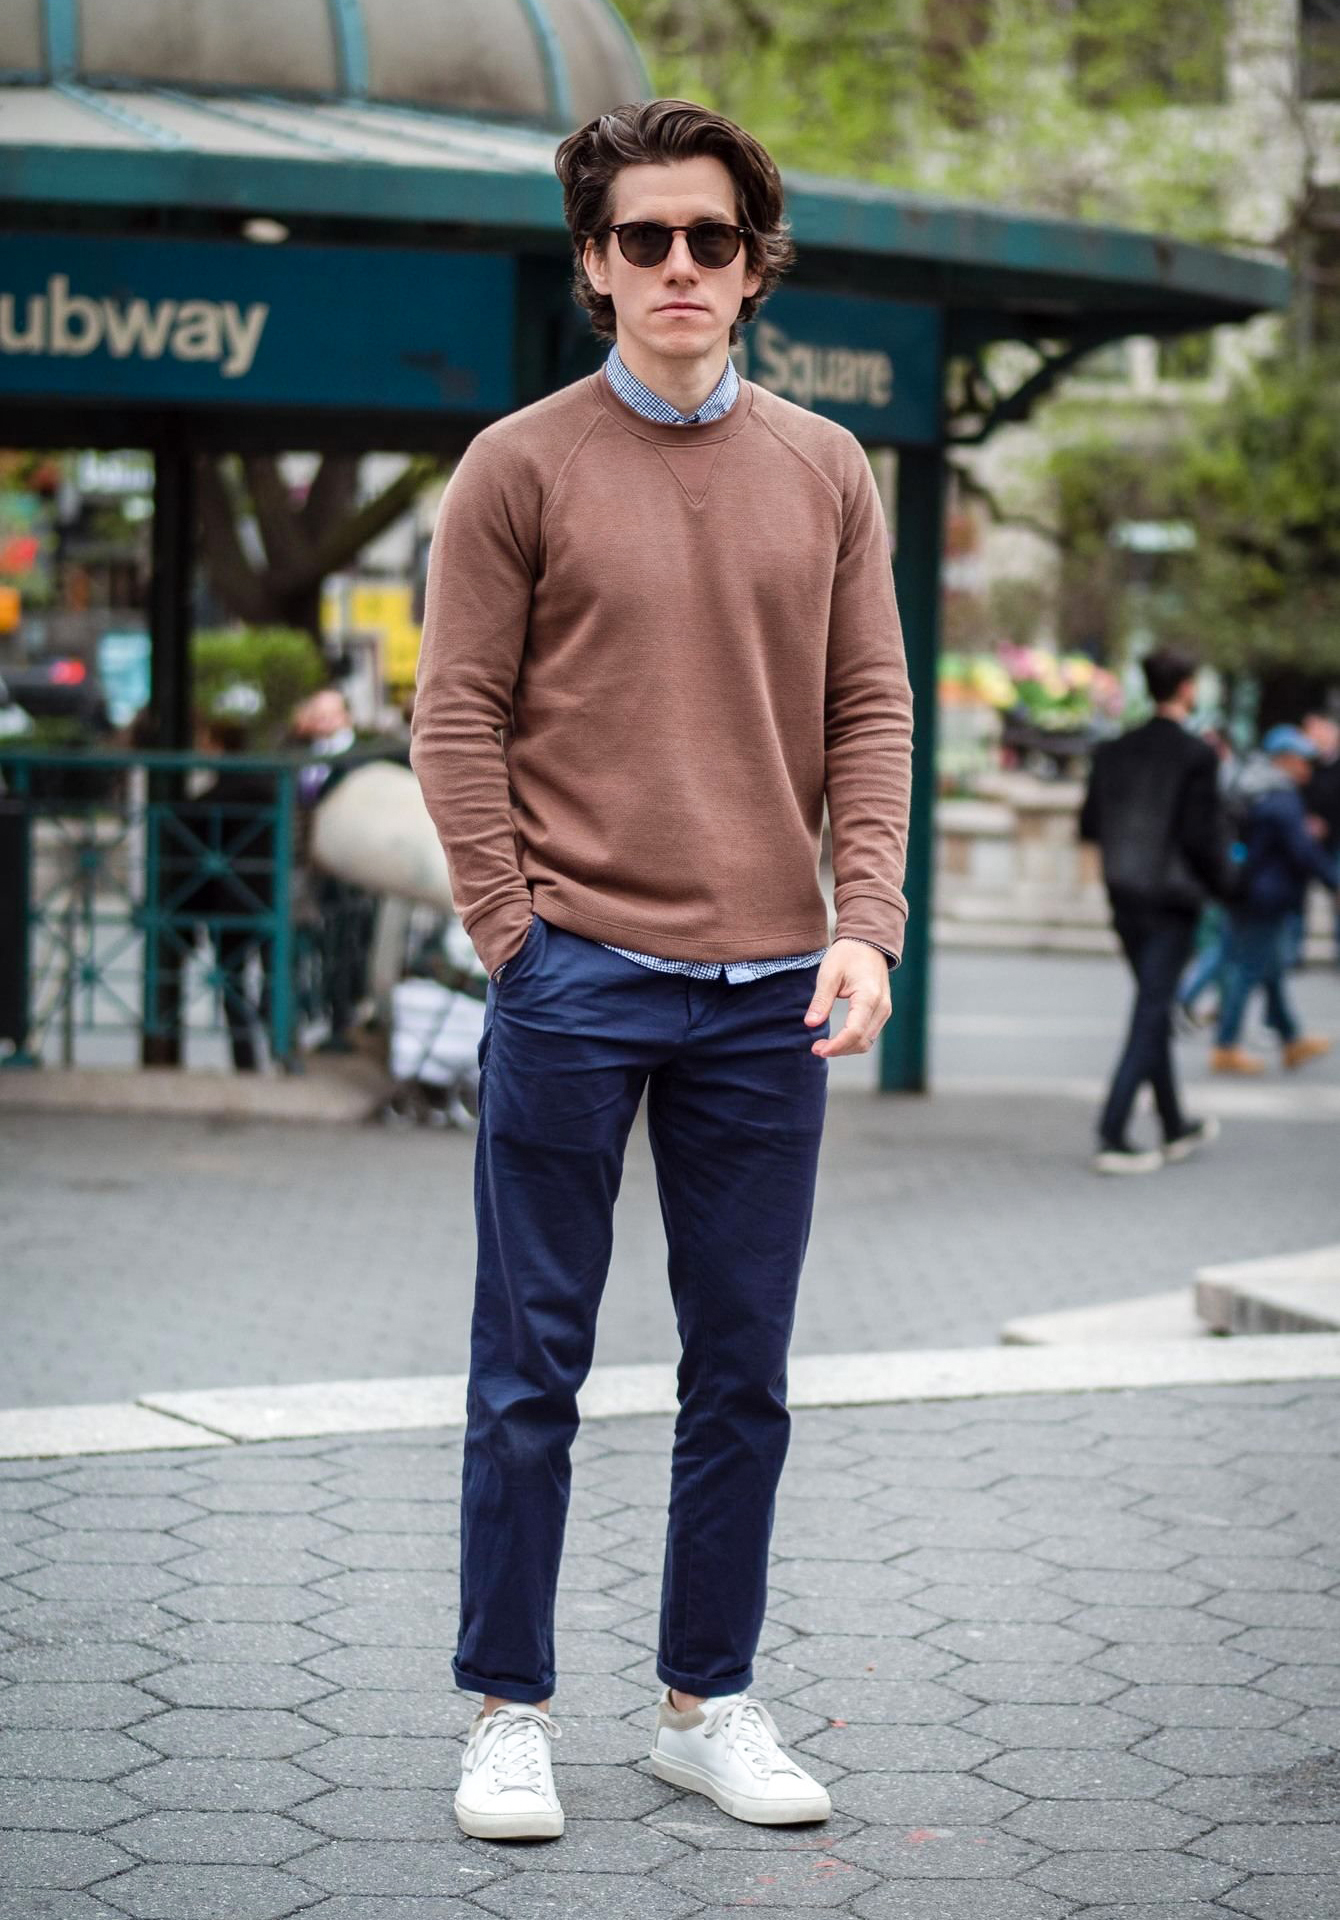 Brown sweater, blue button-down shirt, navy pants, and white shoes